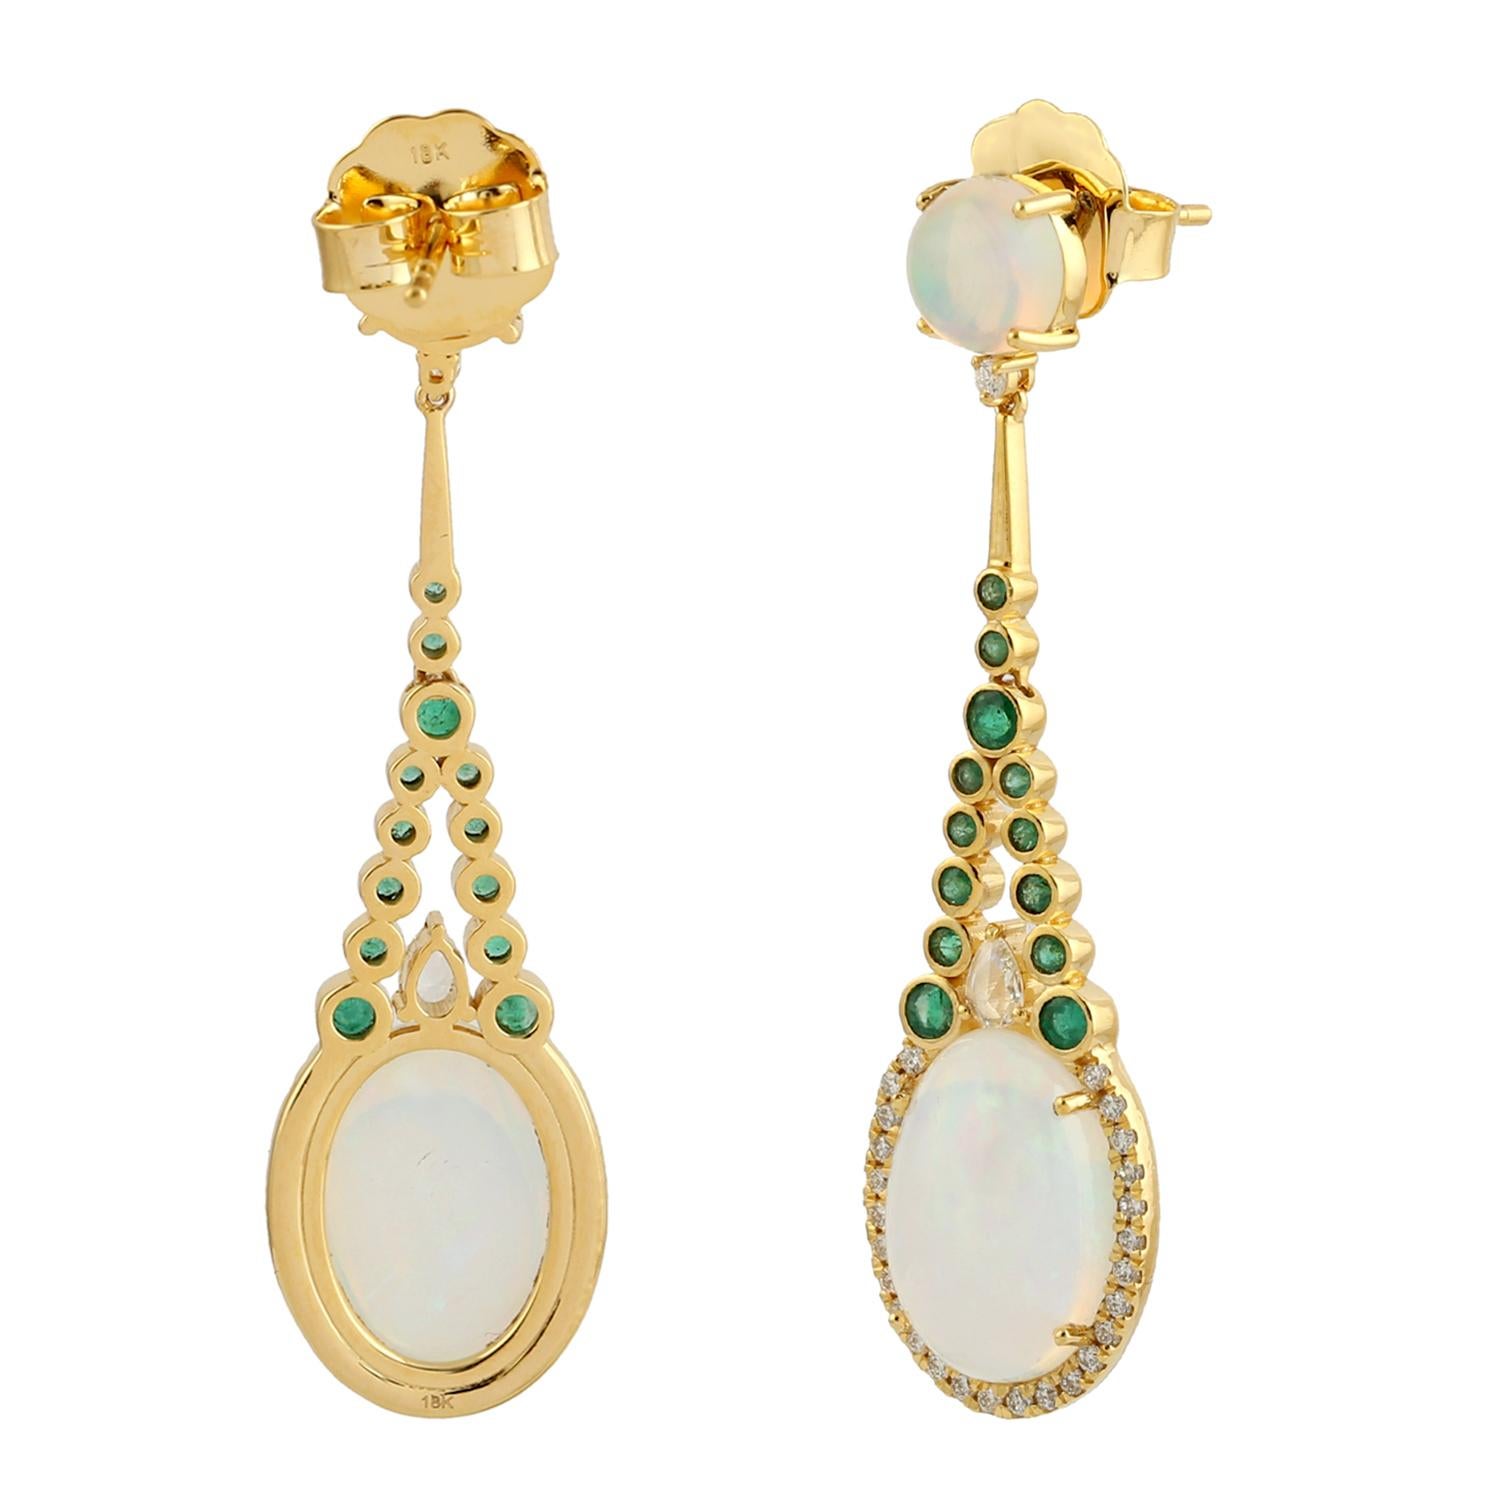 Cast in 18 karat gold. These stud earrings are hand set in 7.85 carats Ethiopian opal, .64 carats emerald and .52 carats of sparkling diamonds. 

FOLLOW MEGHNA JEWELS storefront to view the latest collection & exclusive pieces. Meghna Jewels is